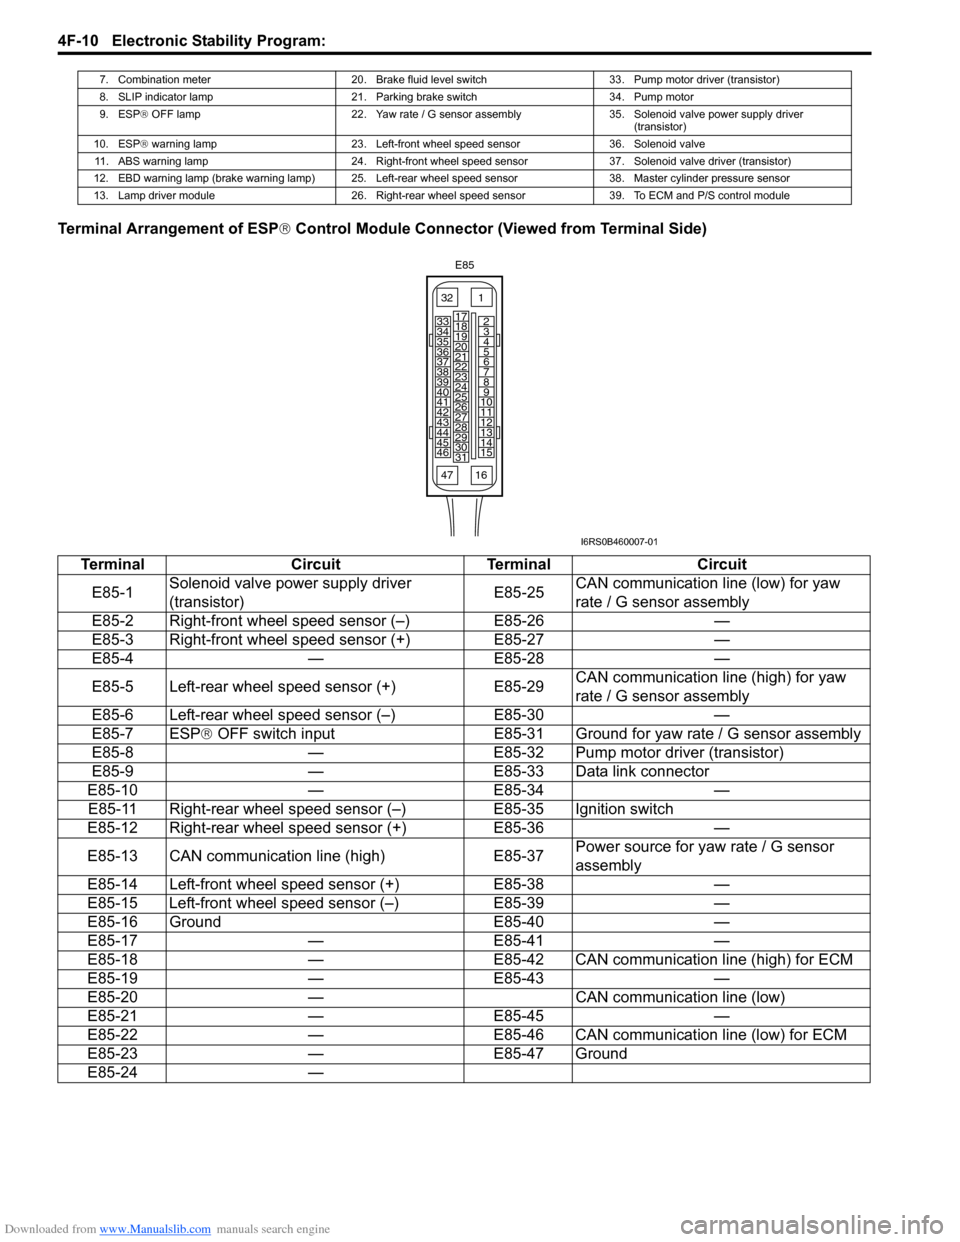 SUZUKI SWIFT 2006 2.G Service Manual PDF Downloaded from www.Manualslib.com manuals search engine 4F-10 Electronic Stability Program: 
Terminal Arrangement of ESP® Control Module Connector (Viewed from Terminal Side)
7. Combination meter 20